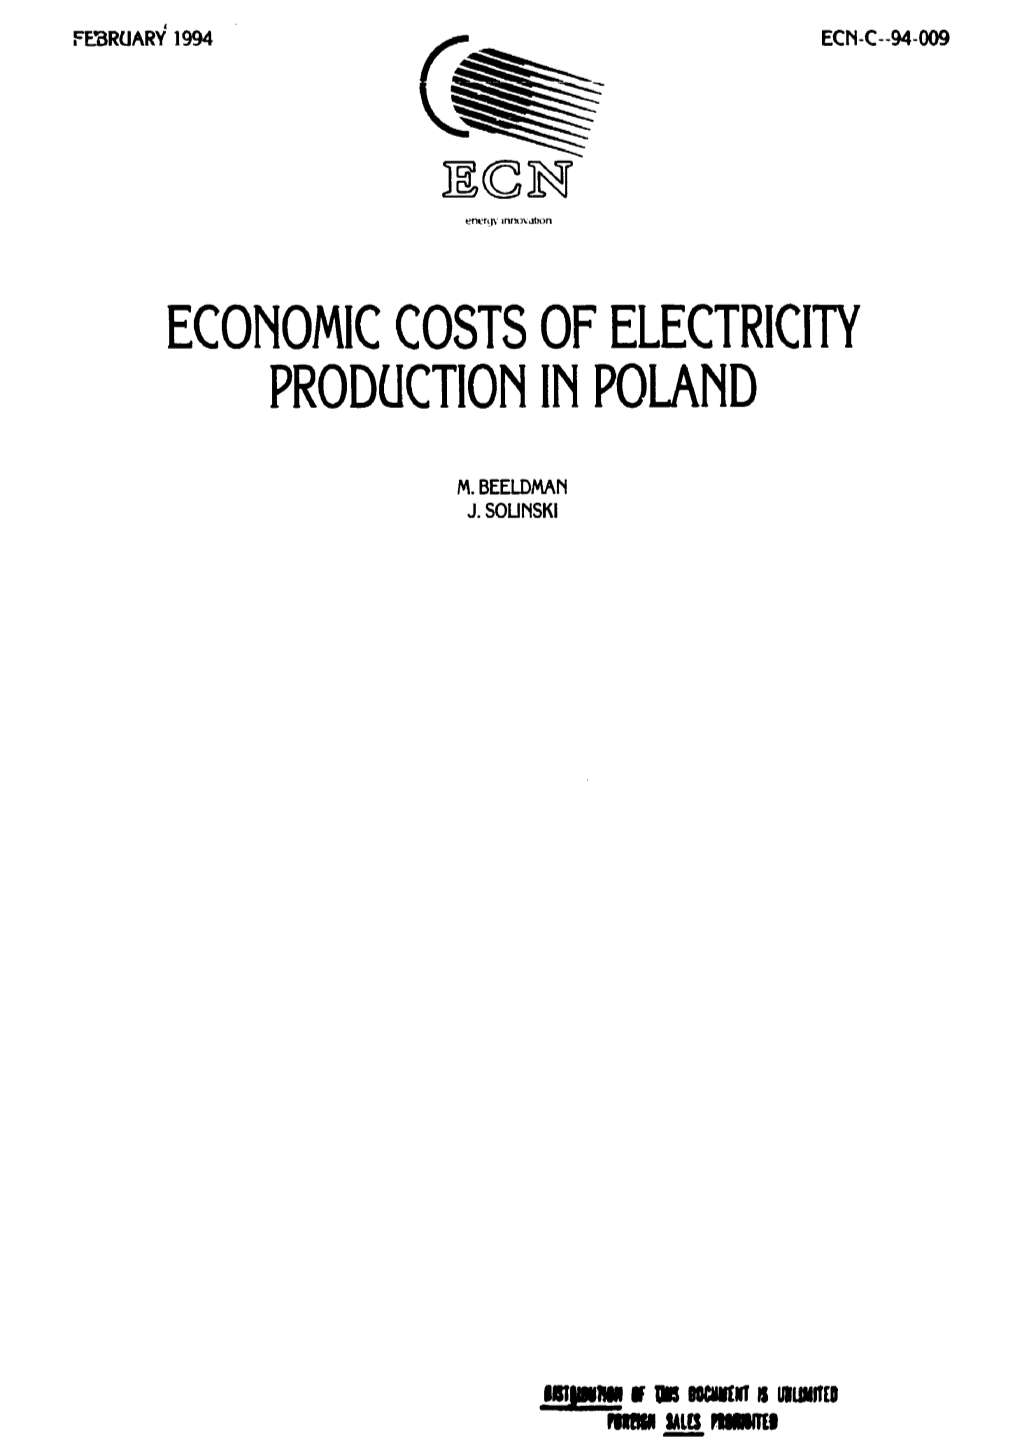 Economic Costs of Electricity Production in Poland